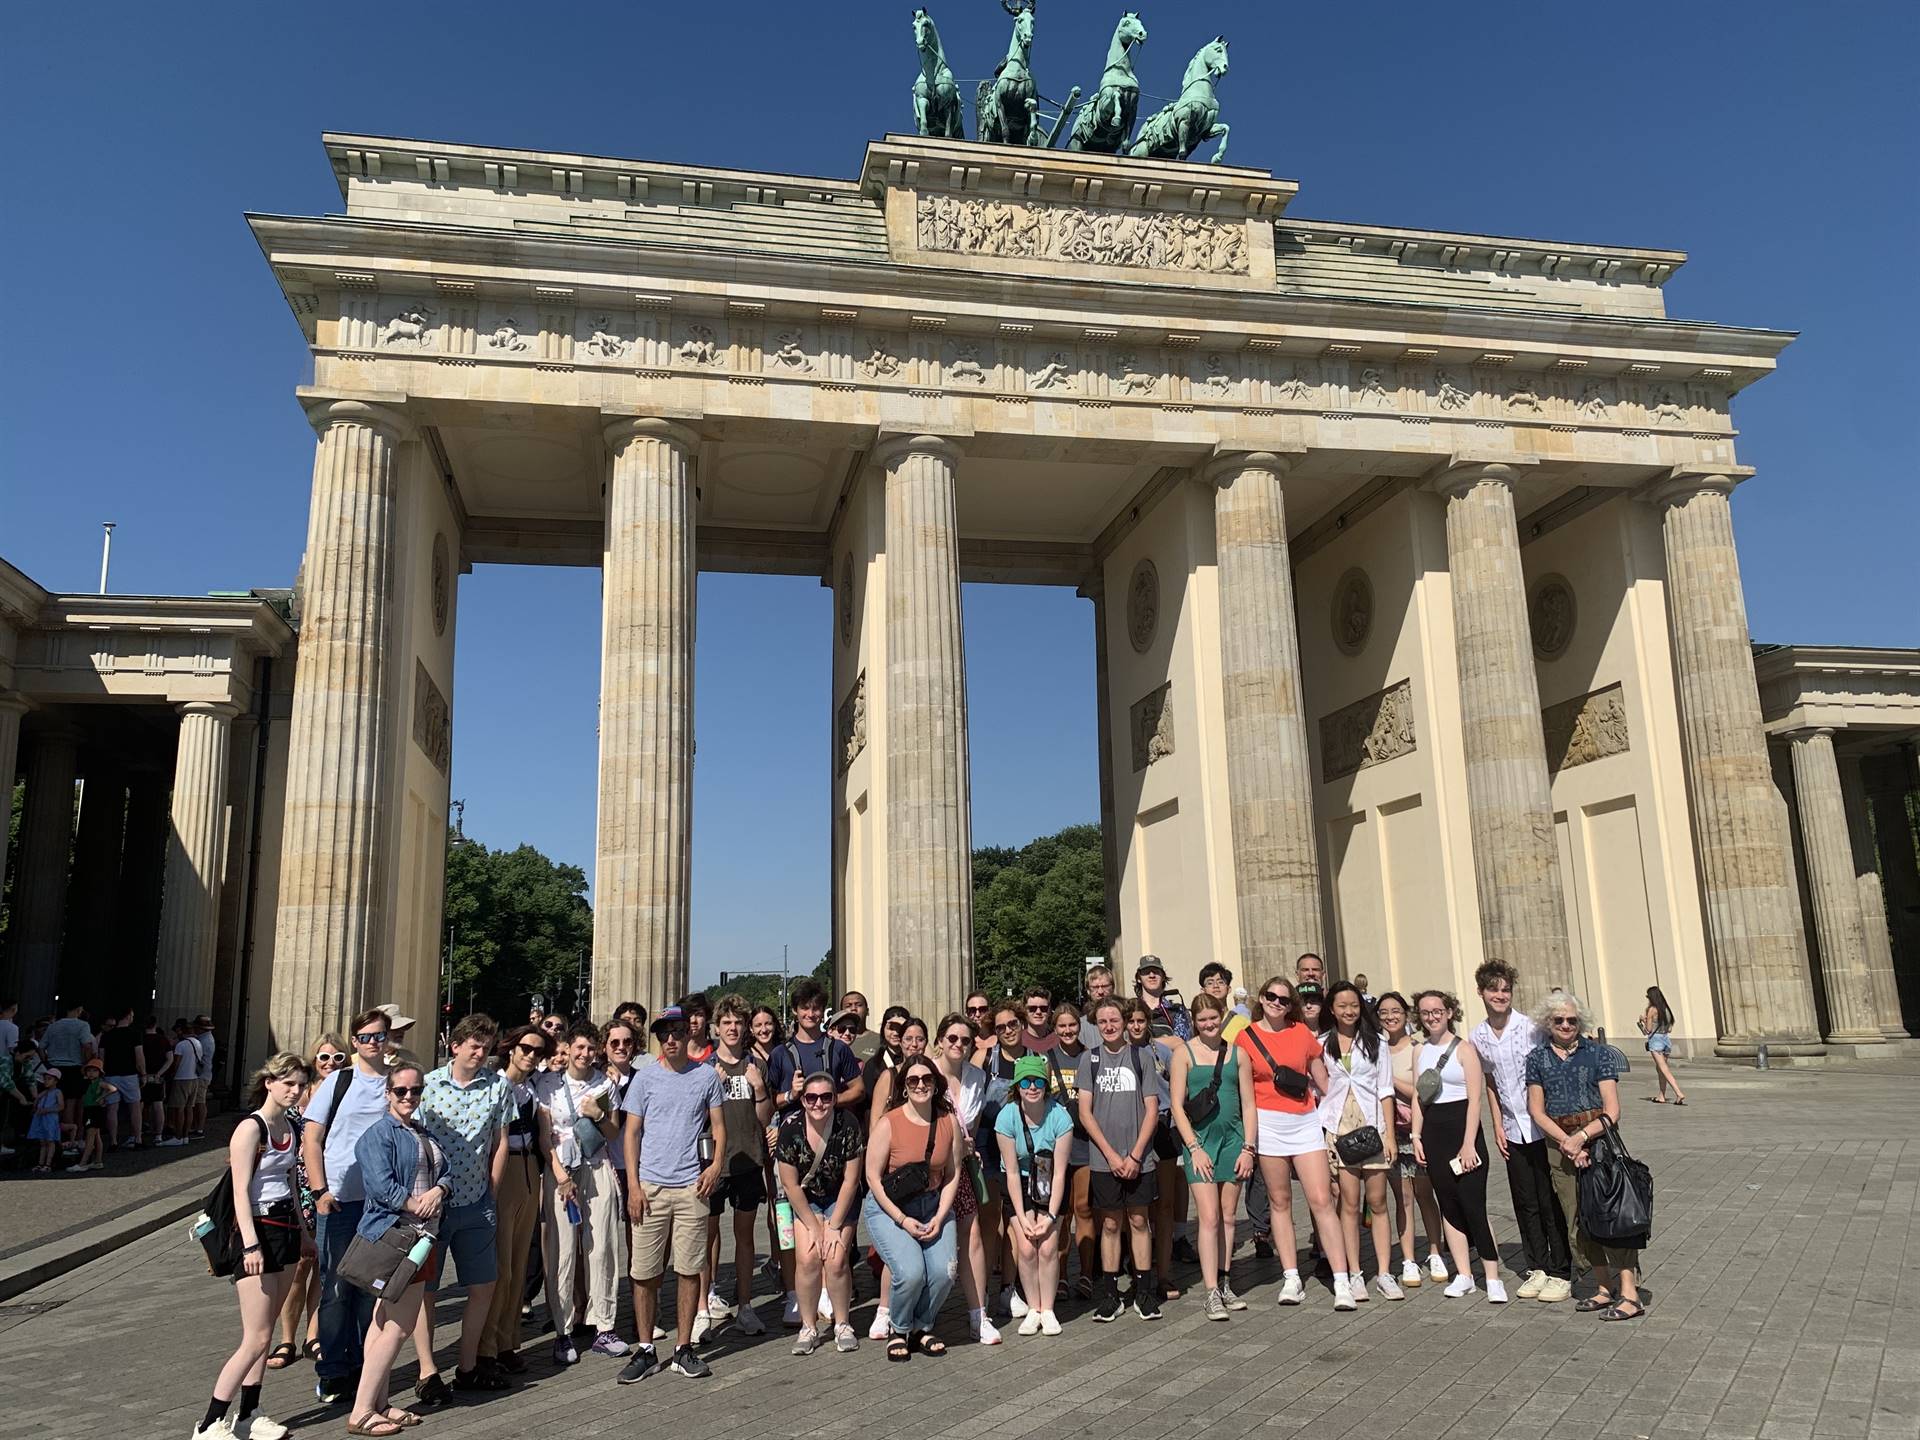 A group of students gathered in front of the Brandenburg Gate